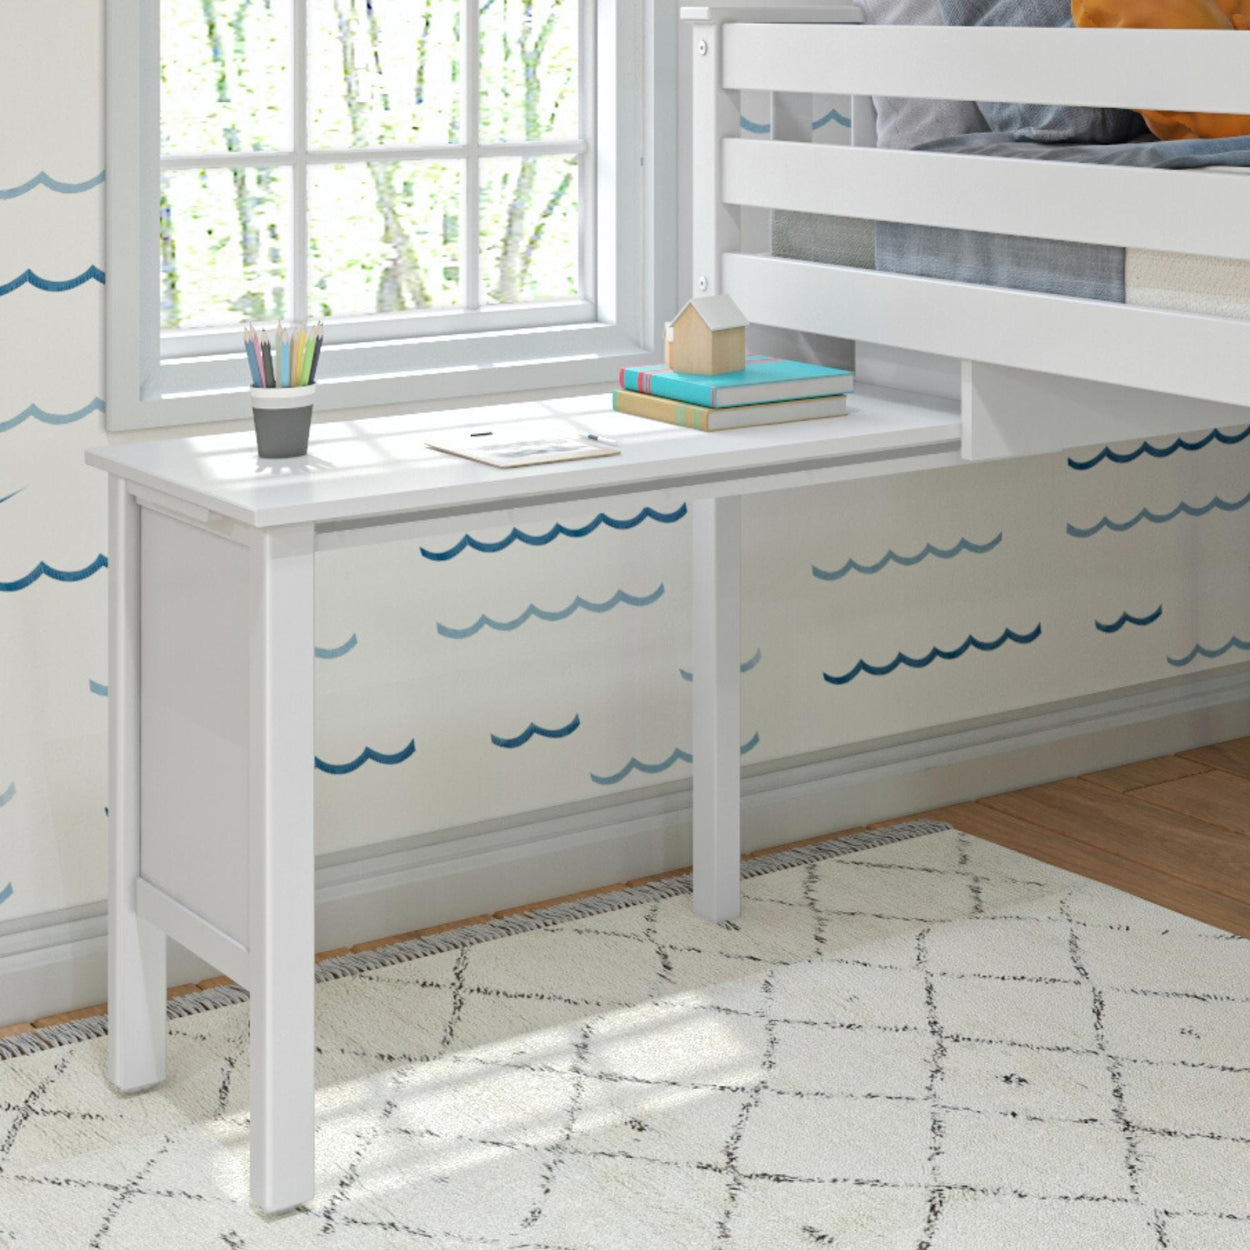 180240-002 : Furniture Pull-out Desk, White